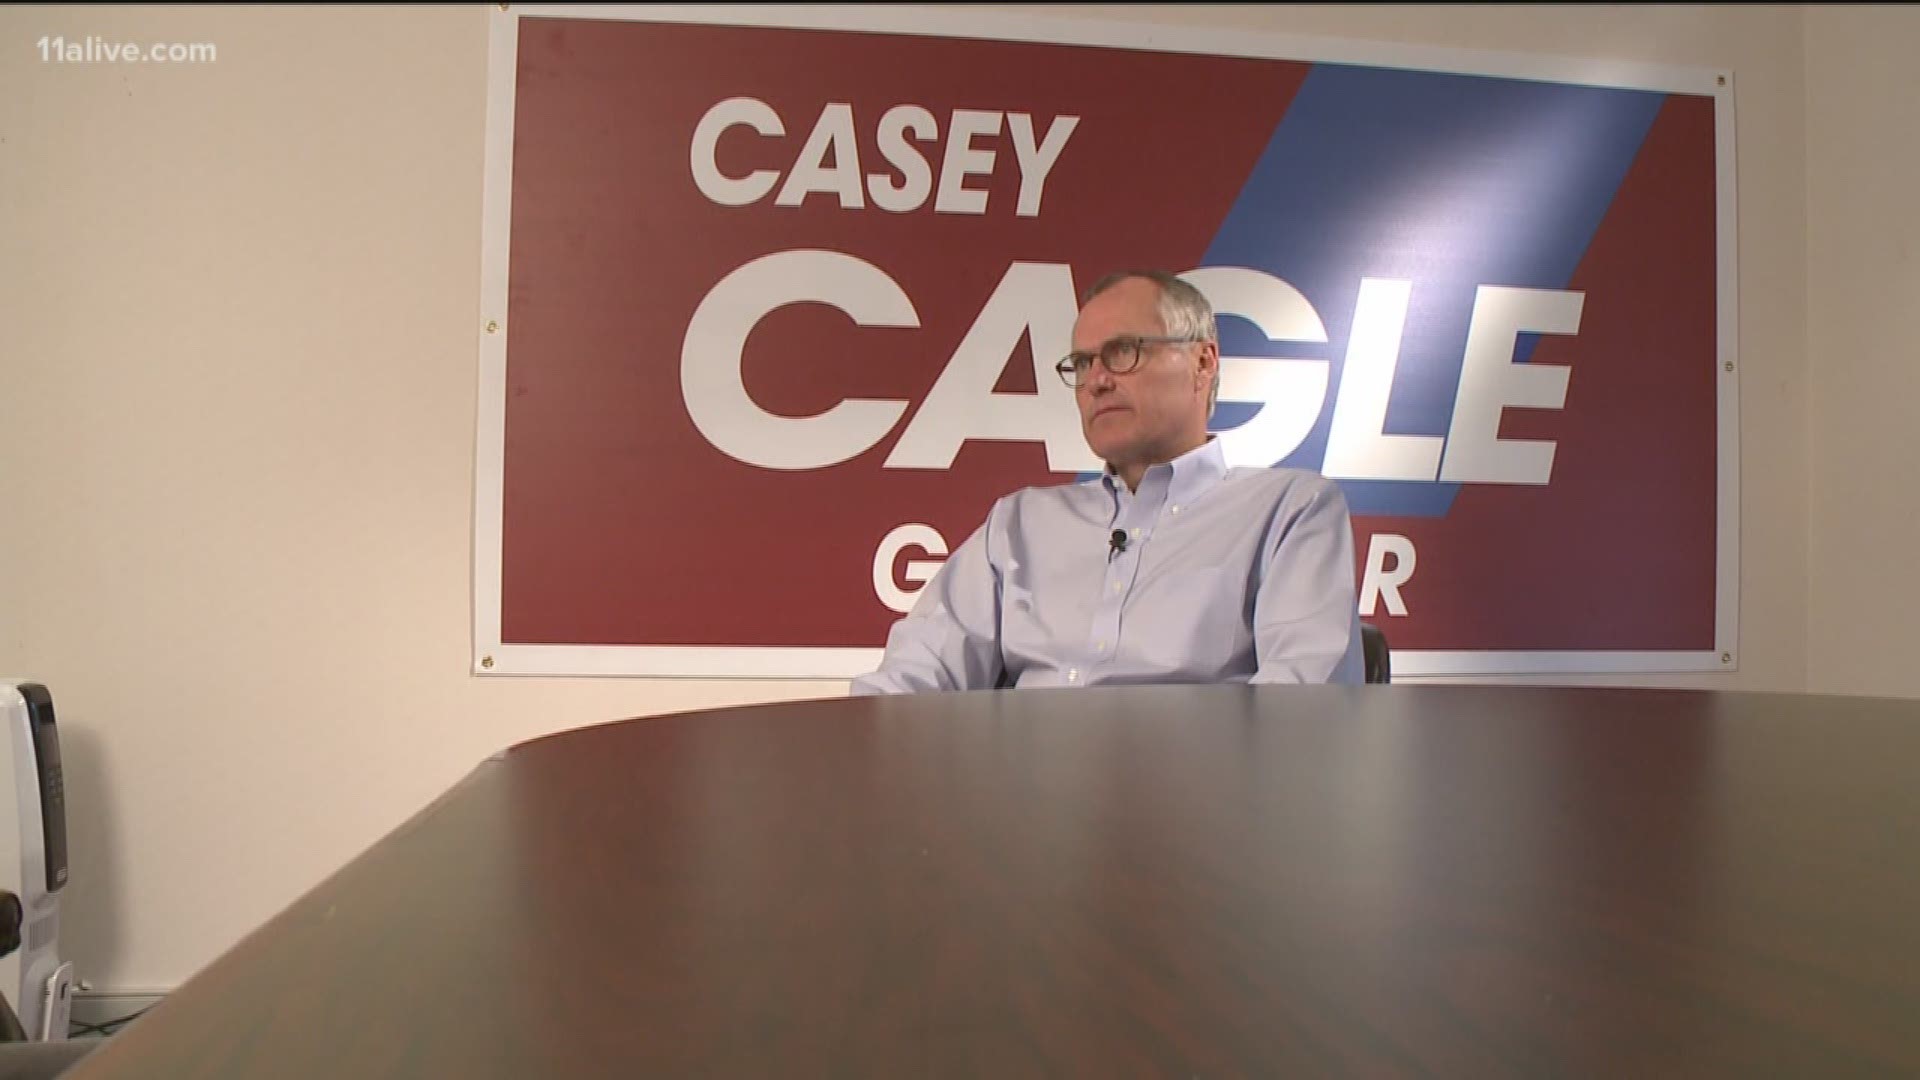 In a letter written Wednesday, two Republican legislators ask local and federal prosecutors to investigate "compelling evidence of a direct quid pro quo offered by Cagle to trade legislative action for campaign funding."  